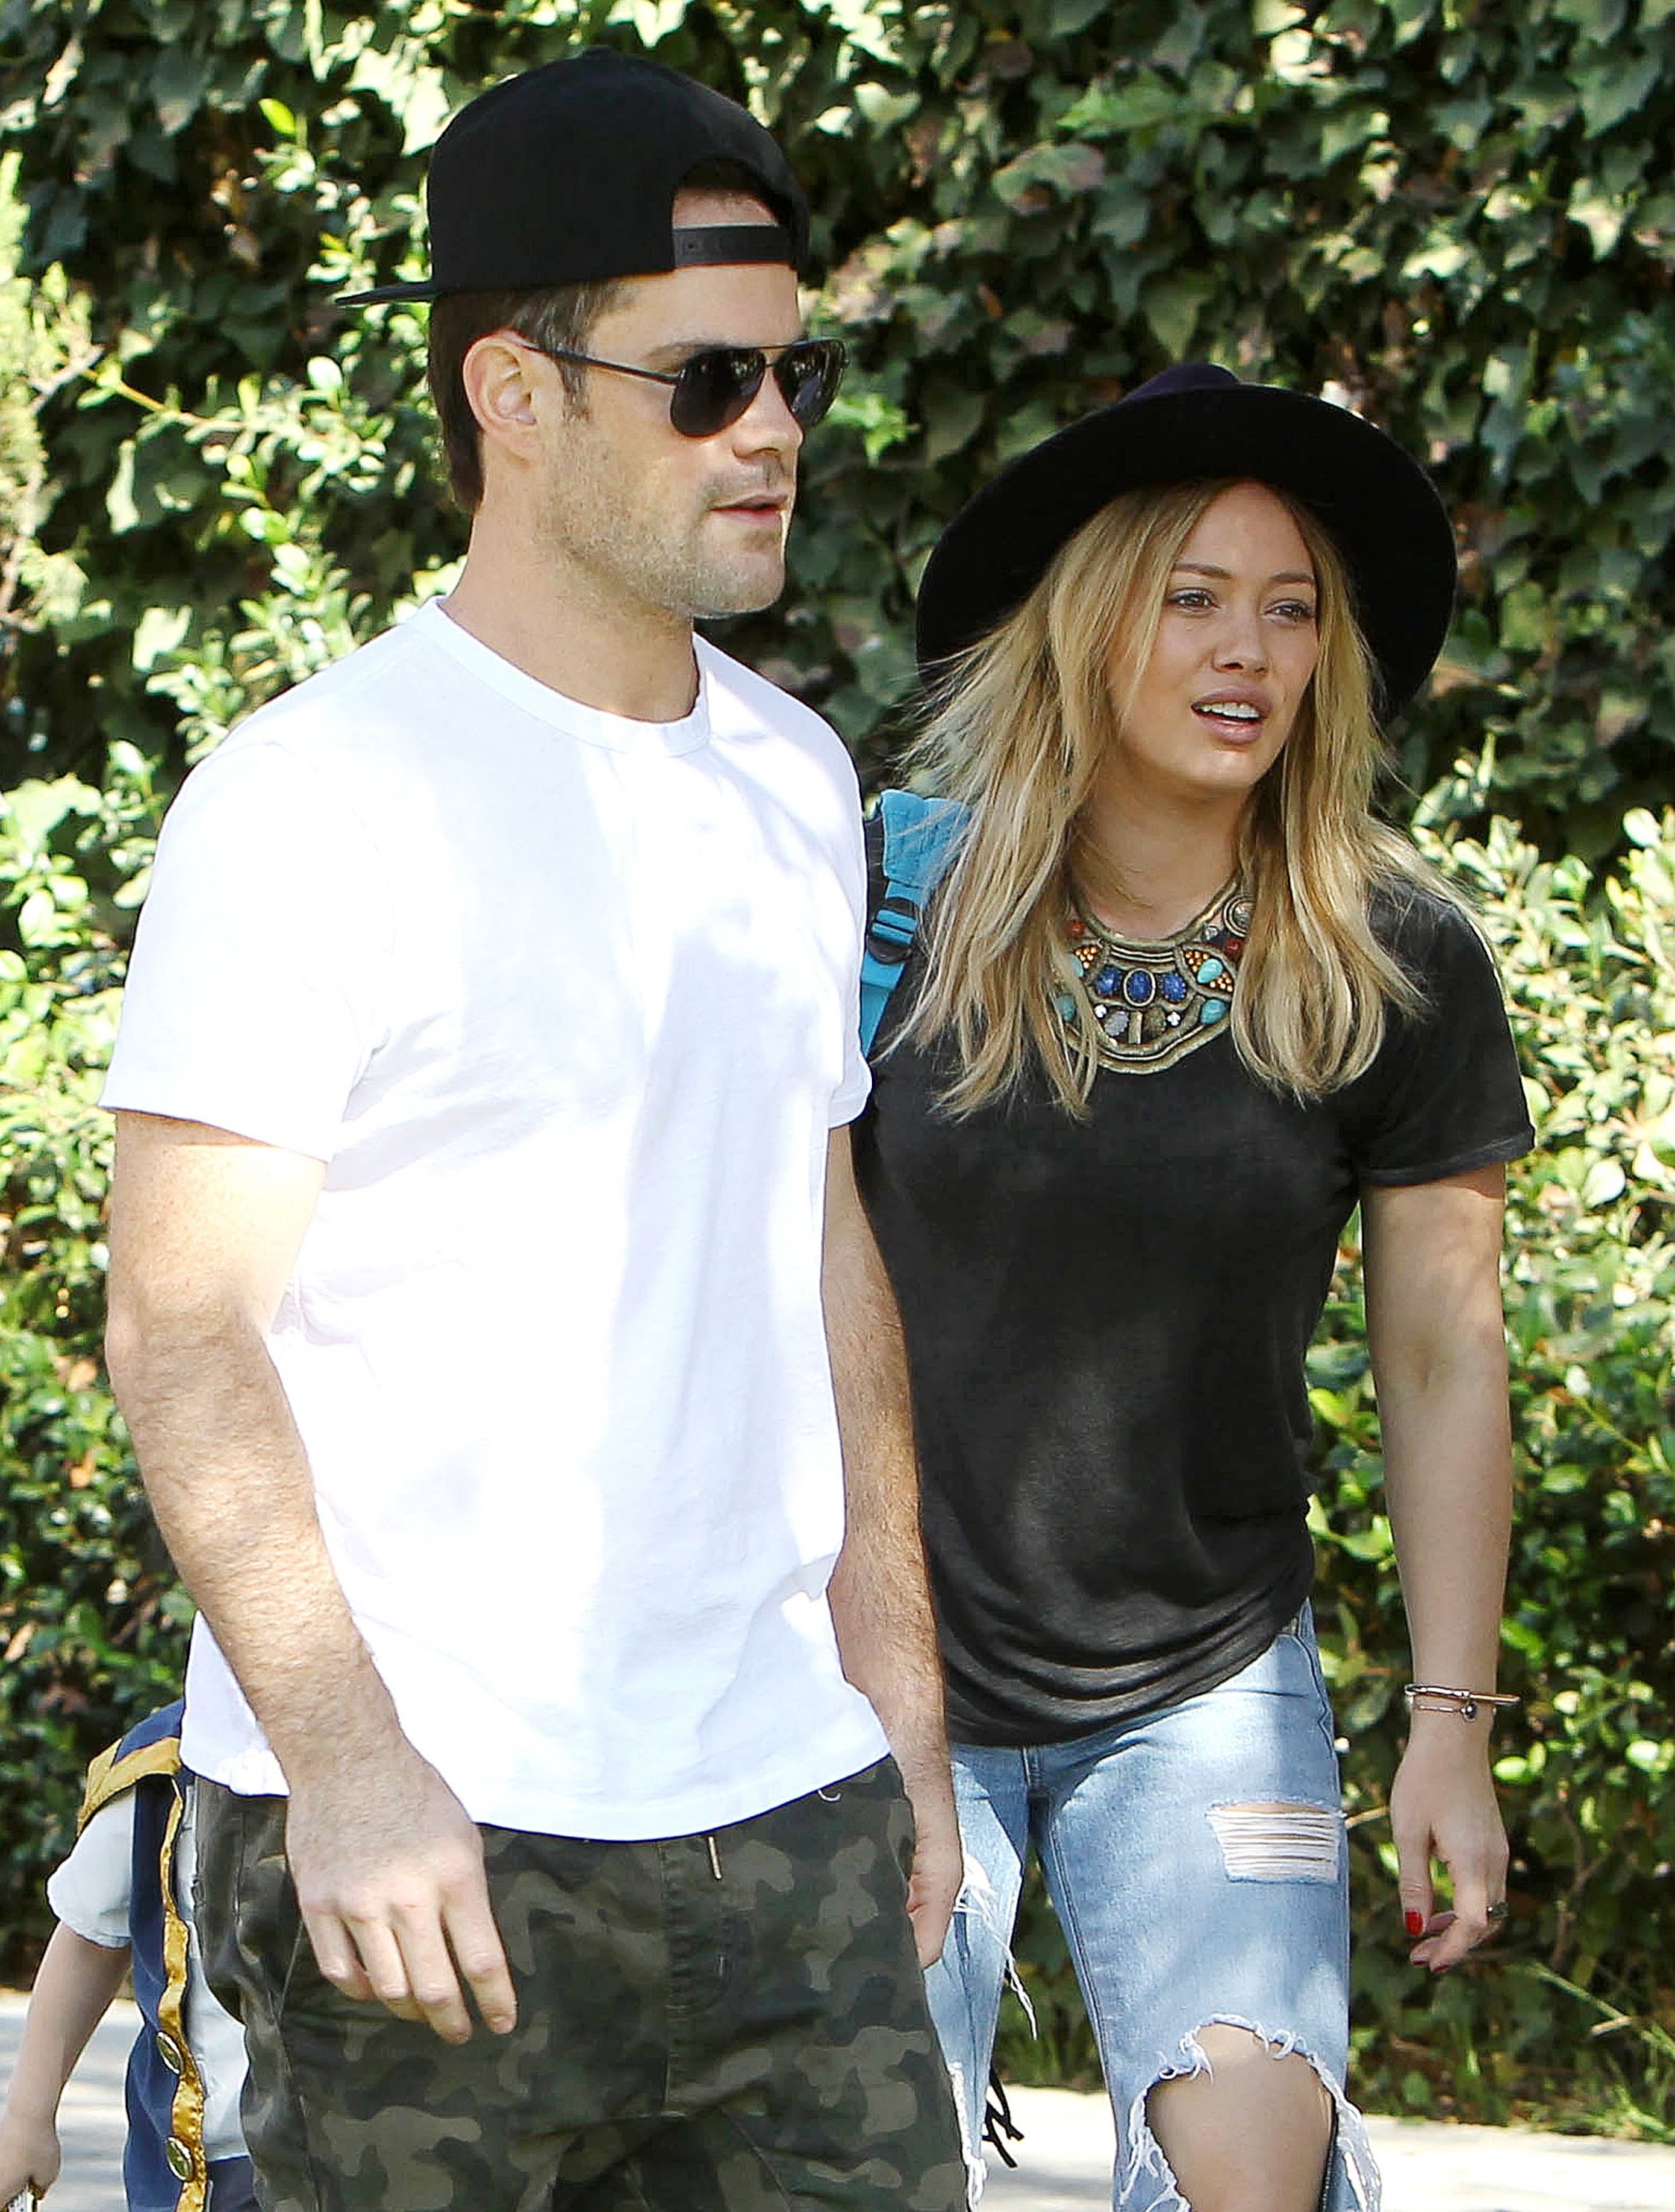 PHOTO: Hilary Duff and Mike Comrie are seen in Beverly Hills, Calif. on Oct. 19, 2014.